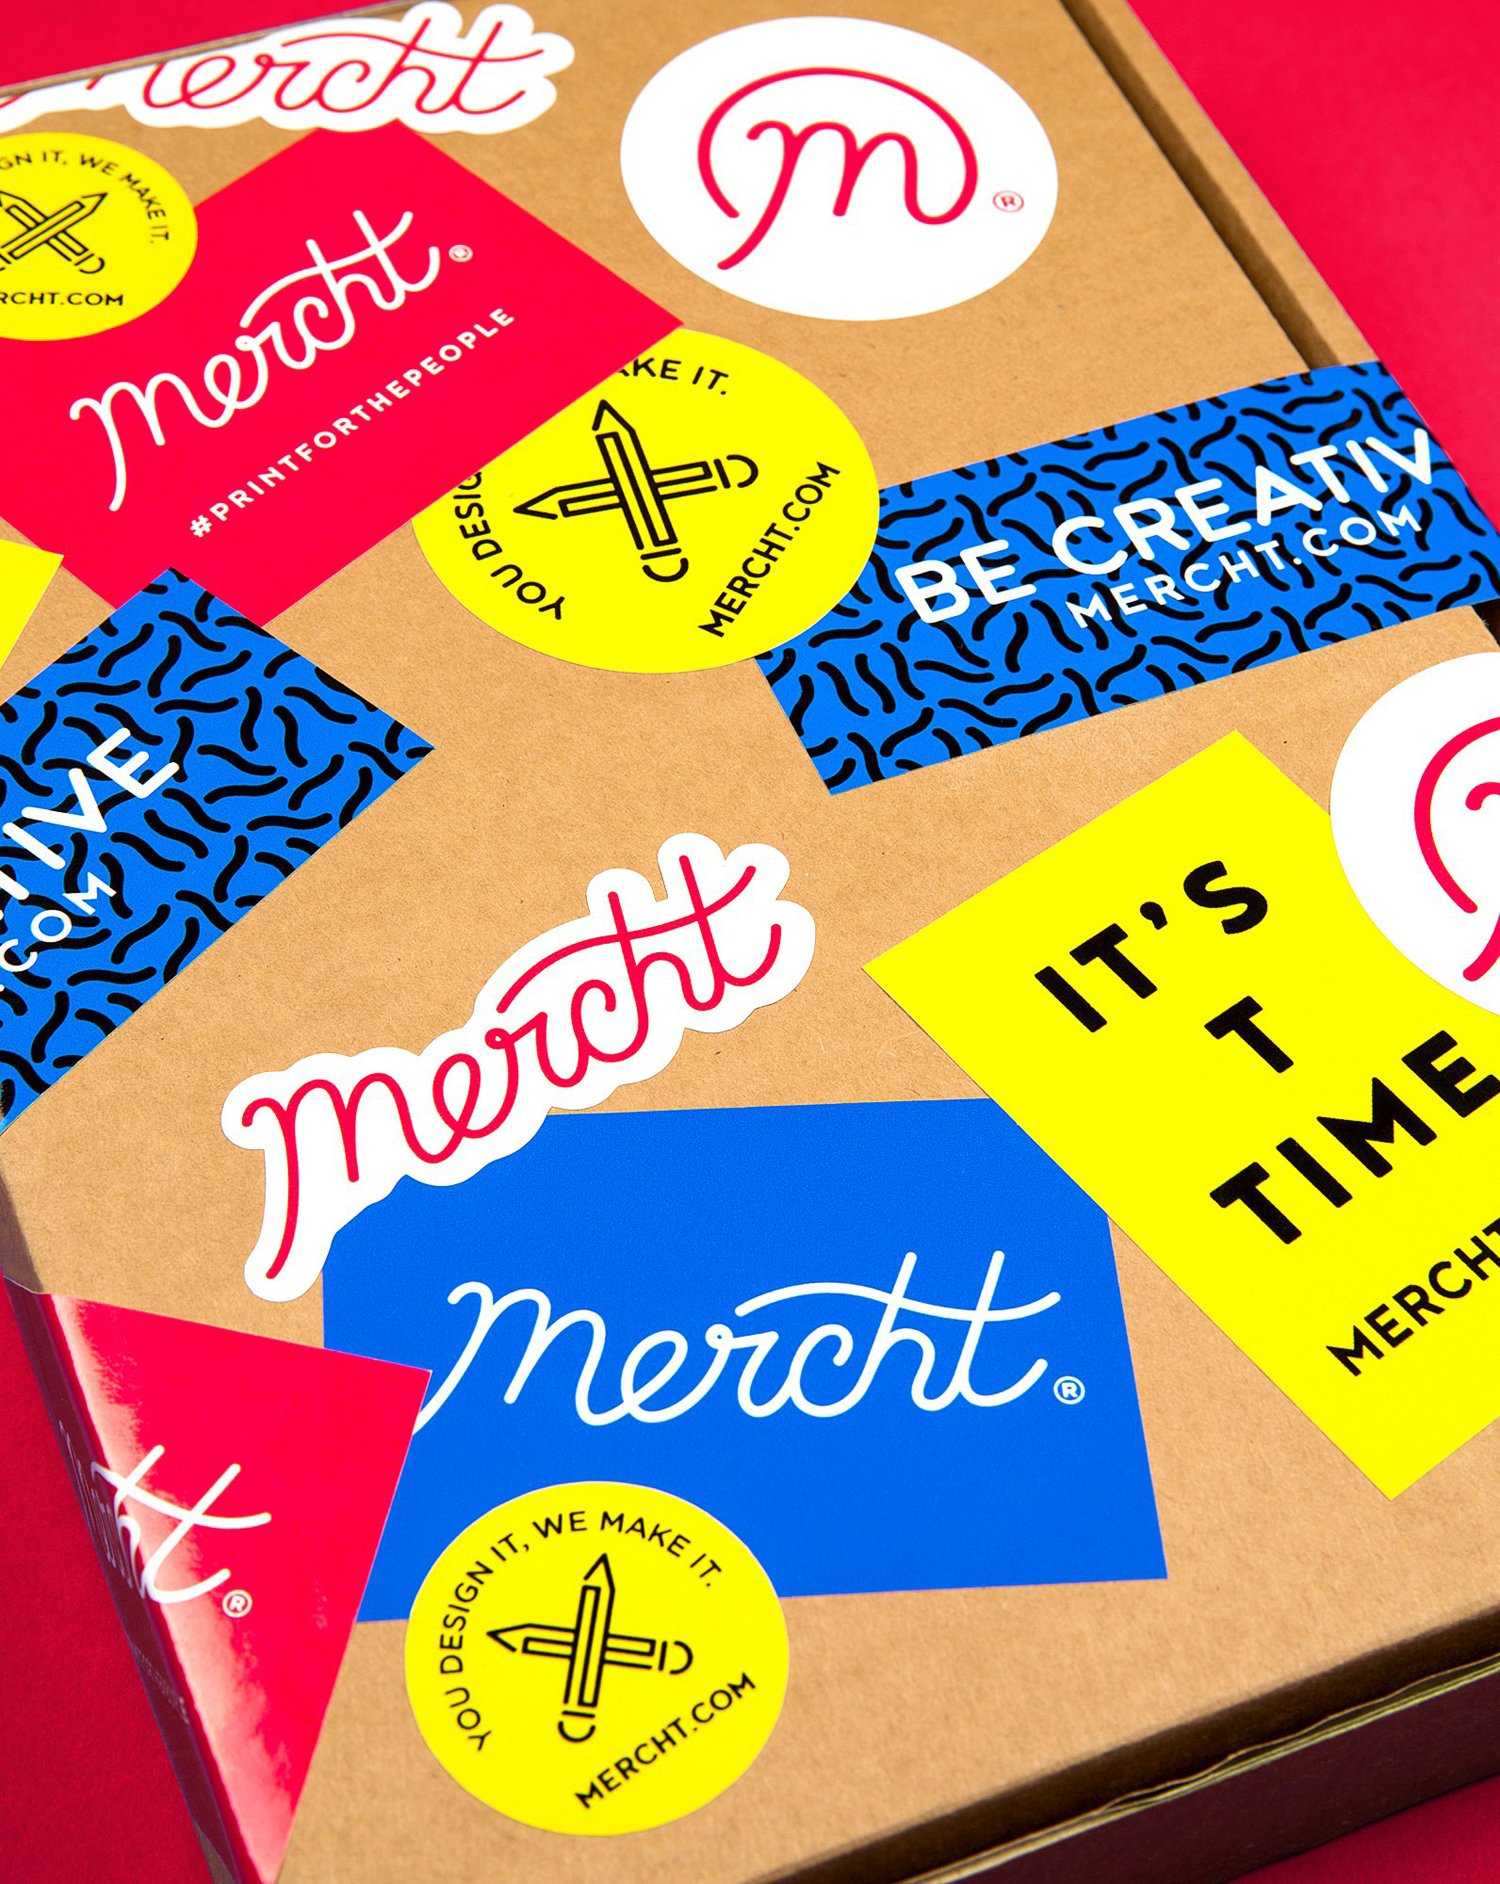 Brand identity and stickers for UK based custom merchandise business Mercht by Robot Food